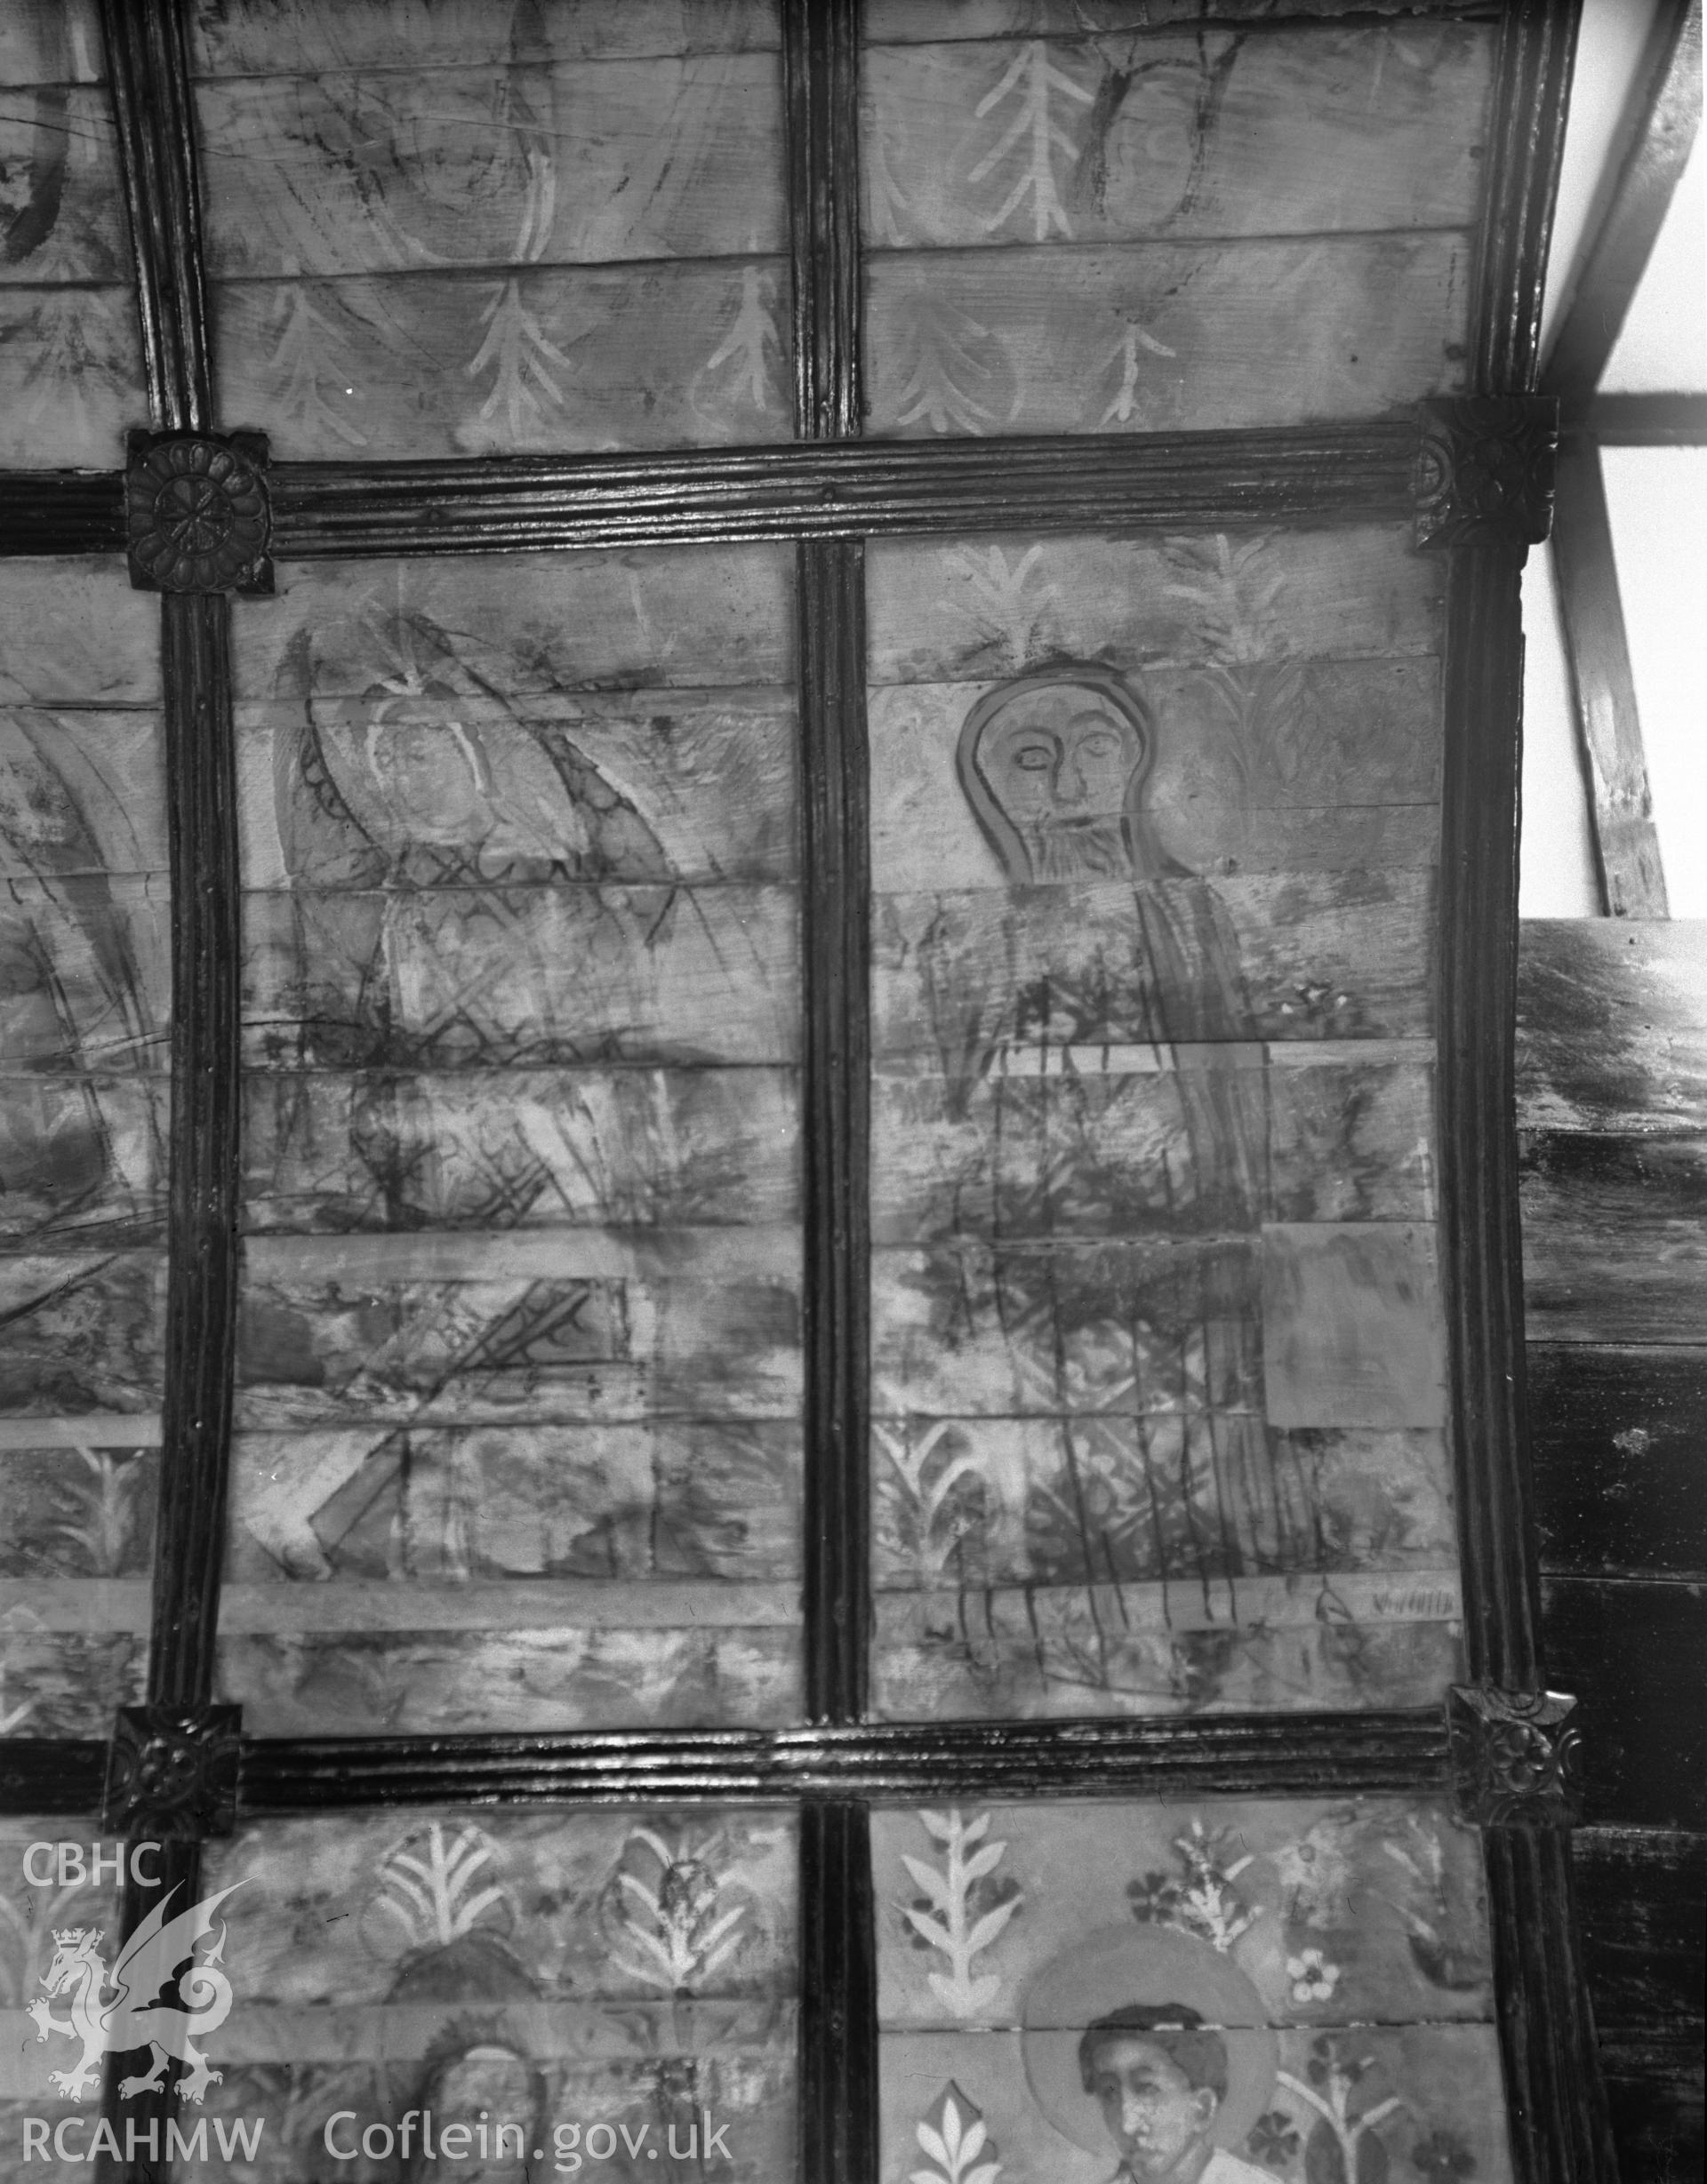 Interior view of St Benedicts Church, Gyffin showing ceiling paintings, taken 30.09.48. Nitrate negative.